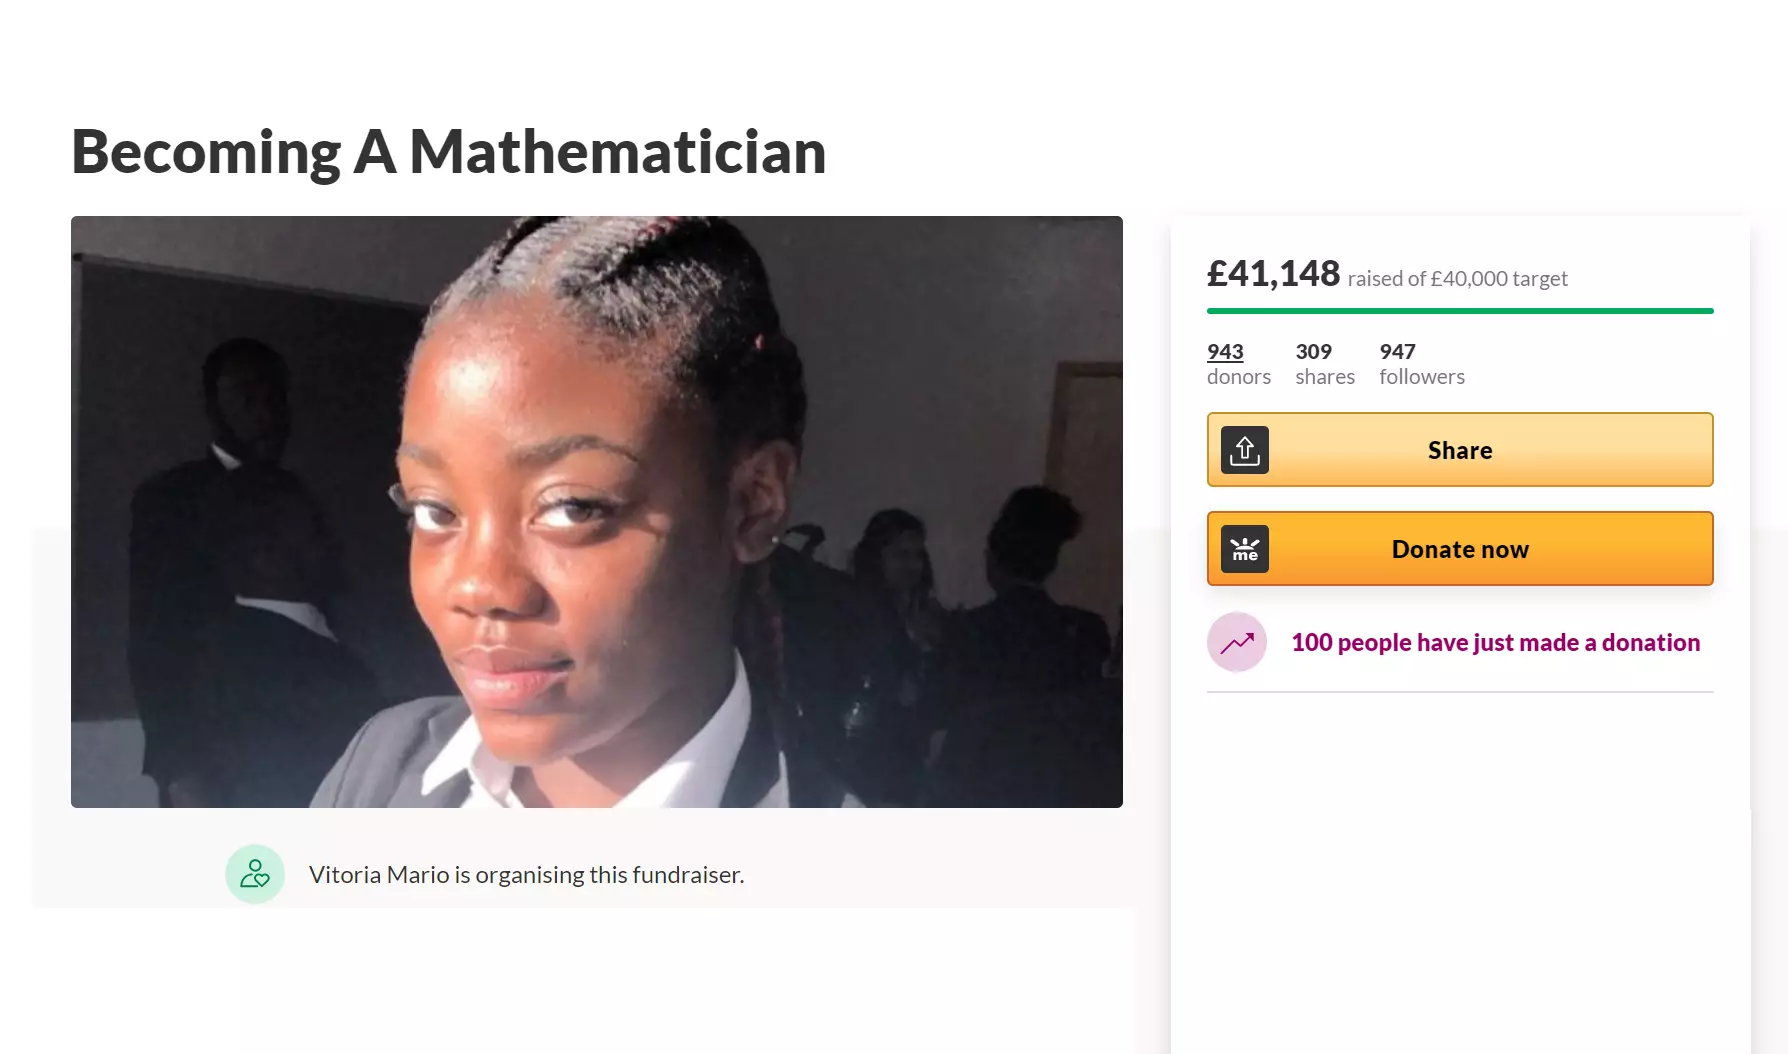 Vitoria Mario was forced to set up a GoFundMe page to raise university funds (